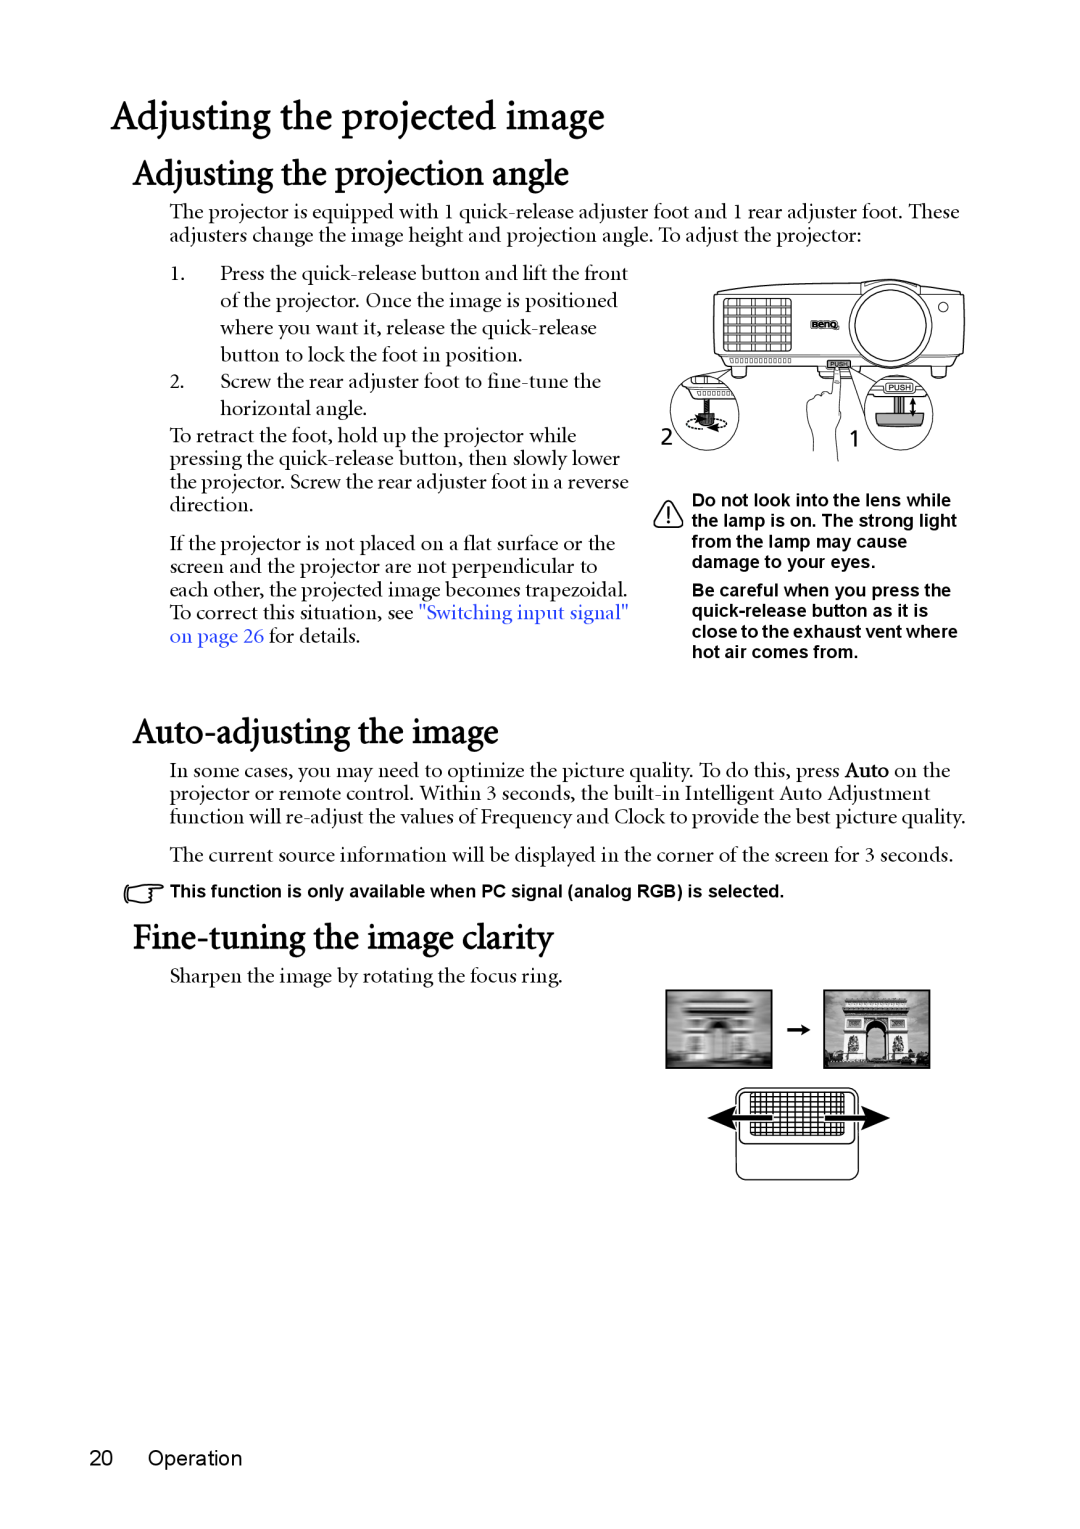 BenQ mw814st user manual Adjusting the projected image, Adjusting the projection angle, Auto-adjusting the image 